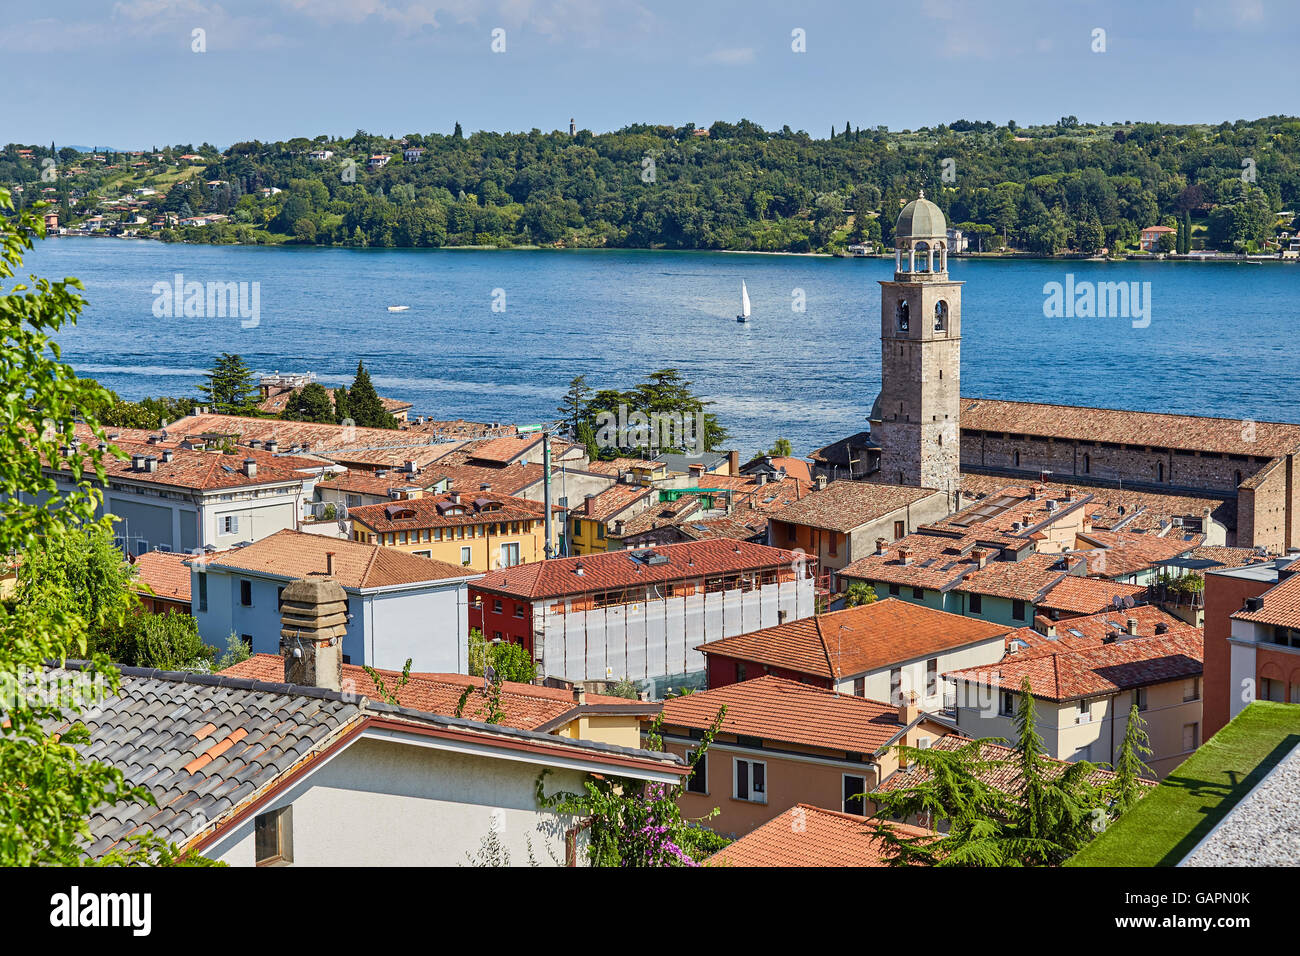 Roof with red tile houses and scenery on Lake Garda in Italy, with yacht Stock Photo